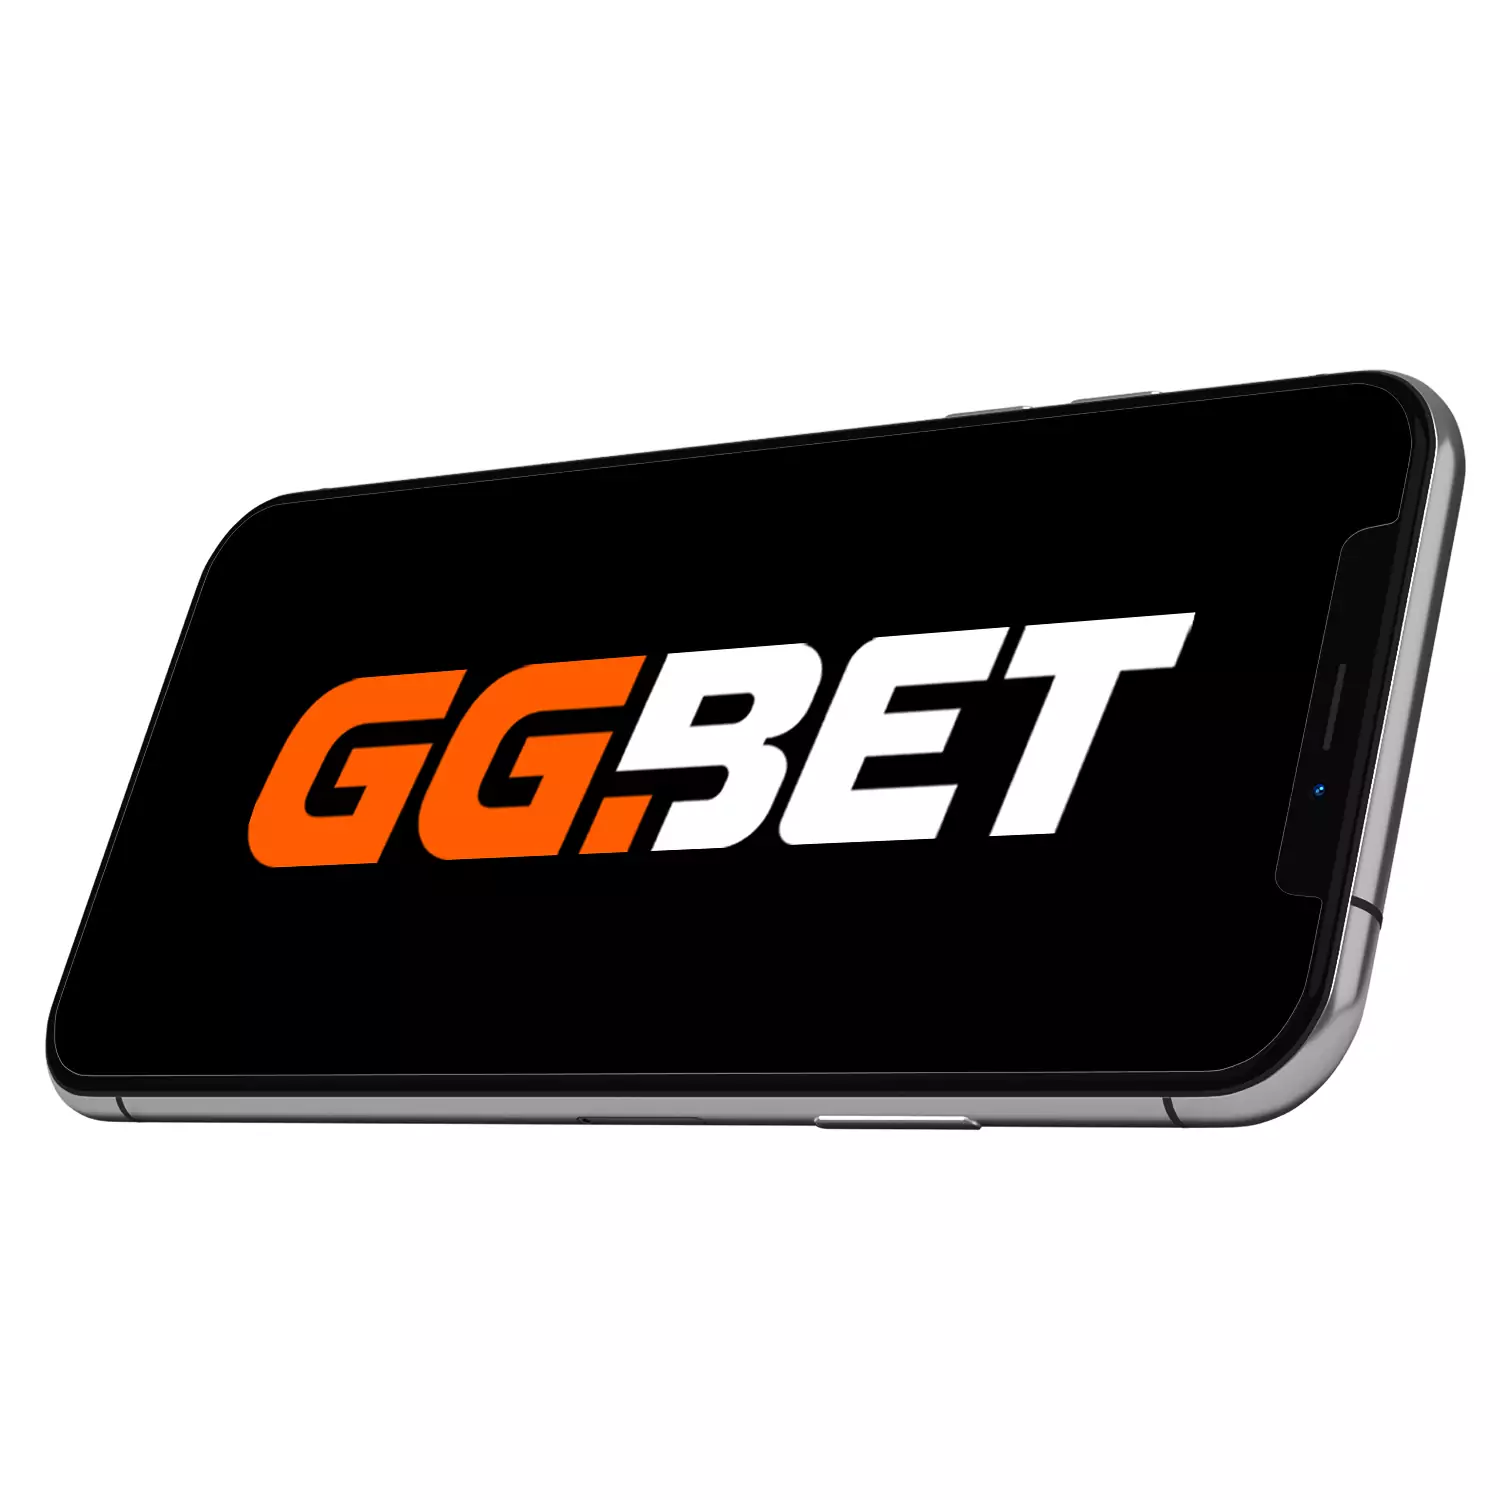 Cricket betting is available in the GGbet app.